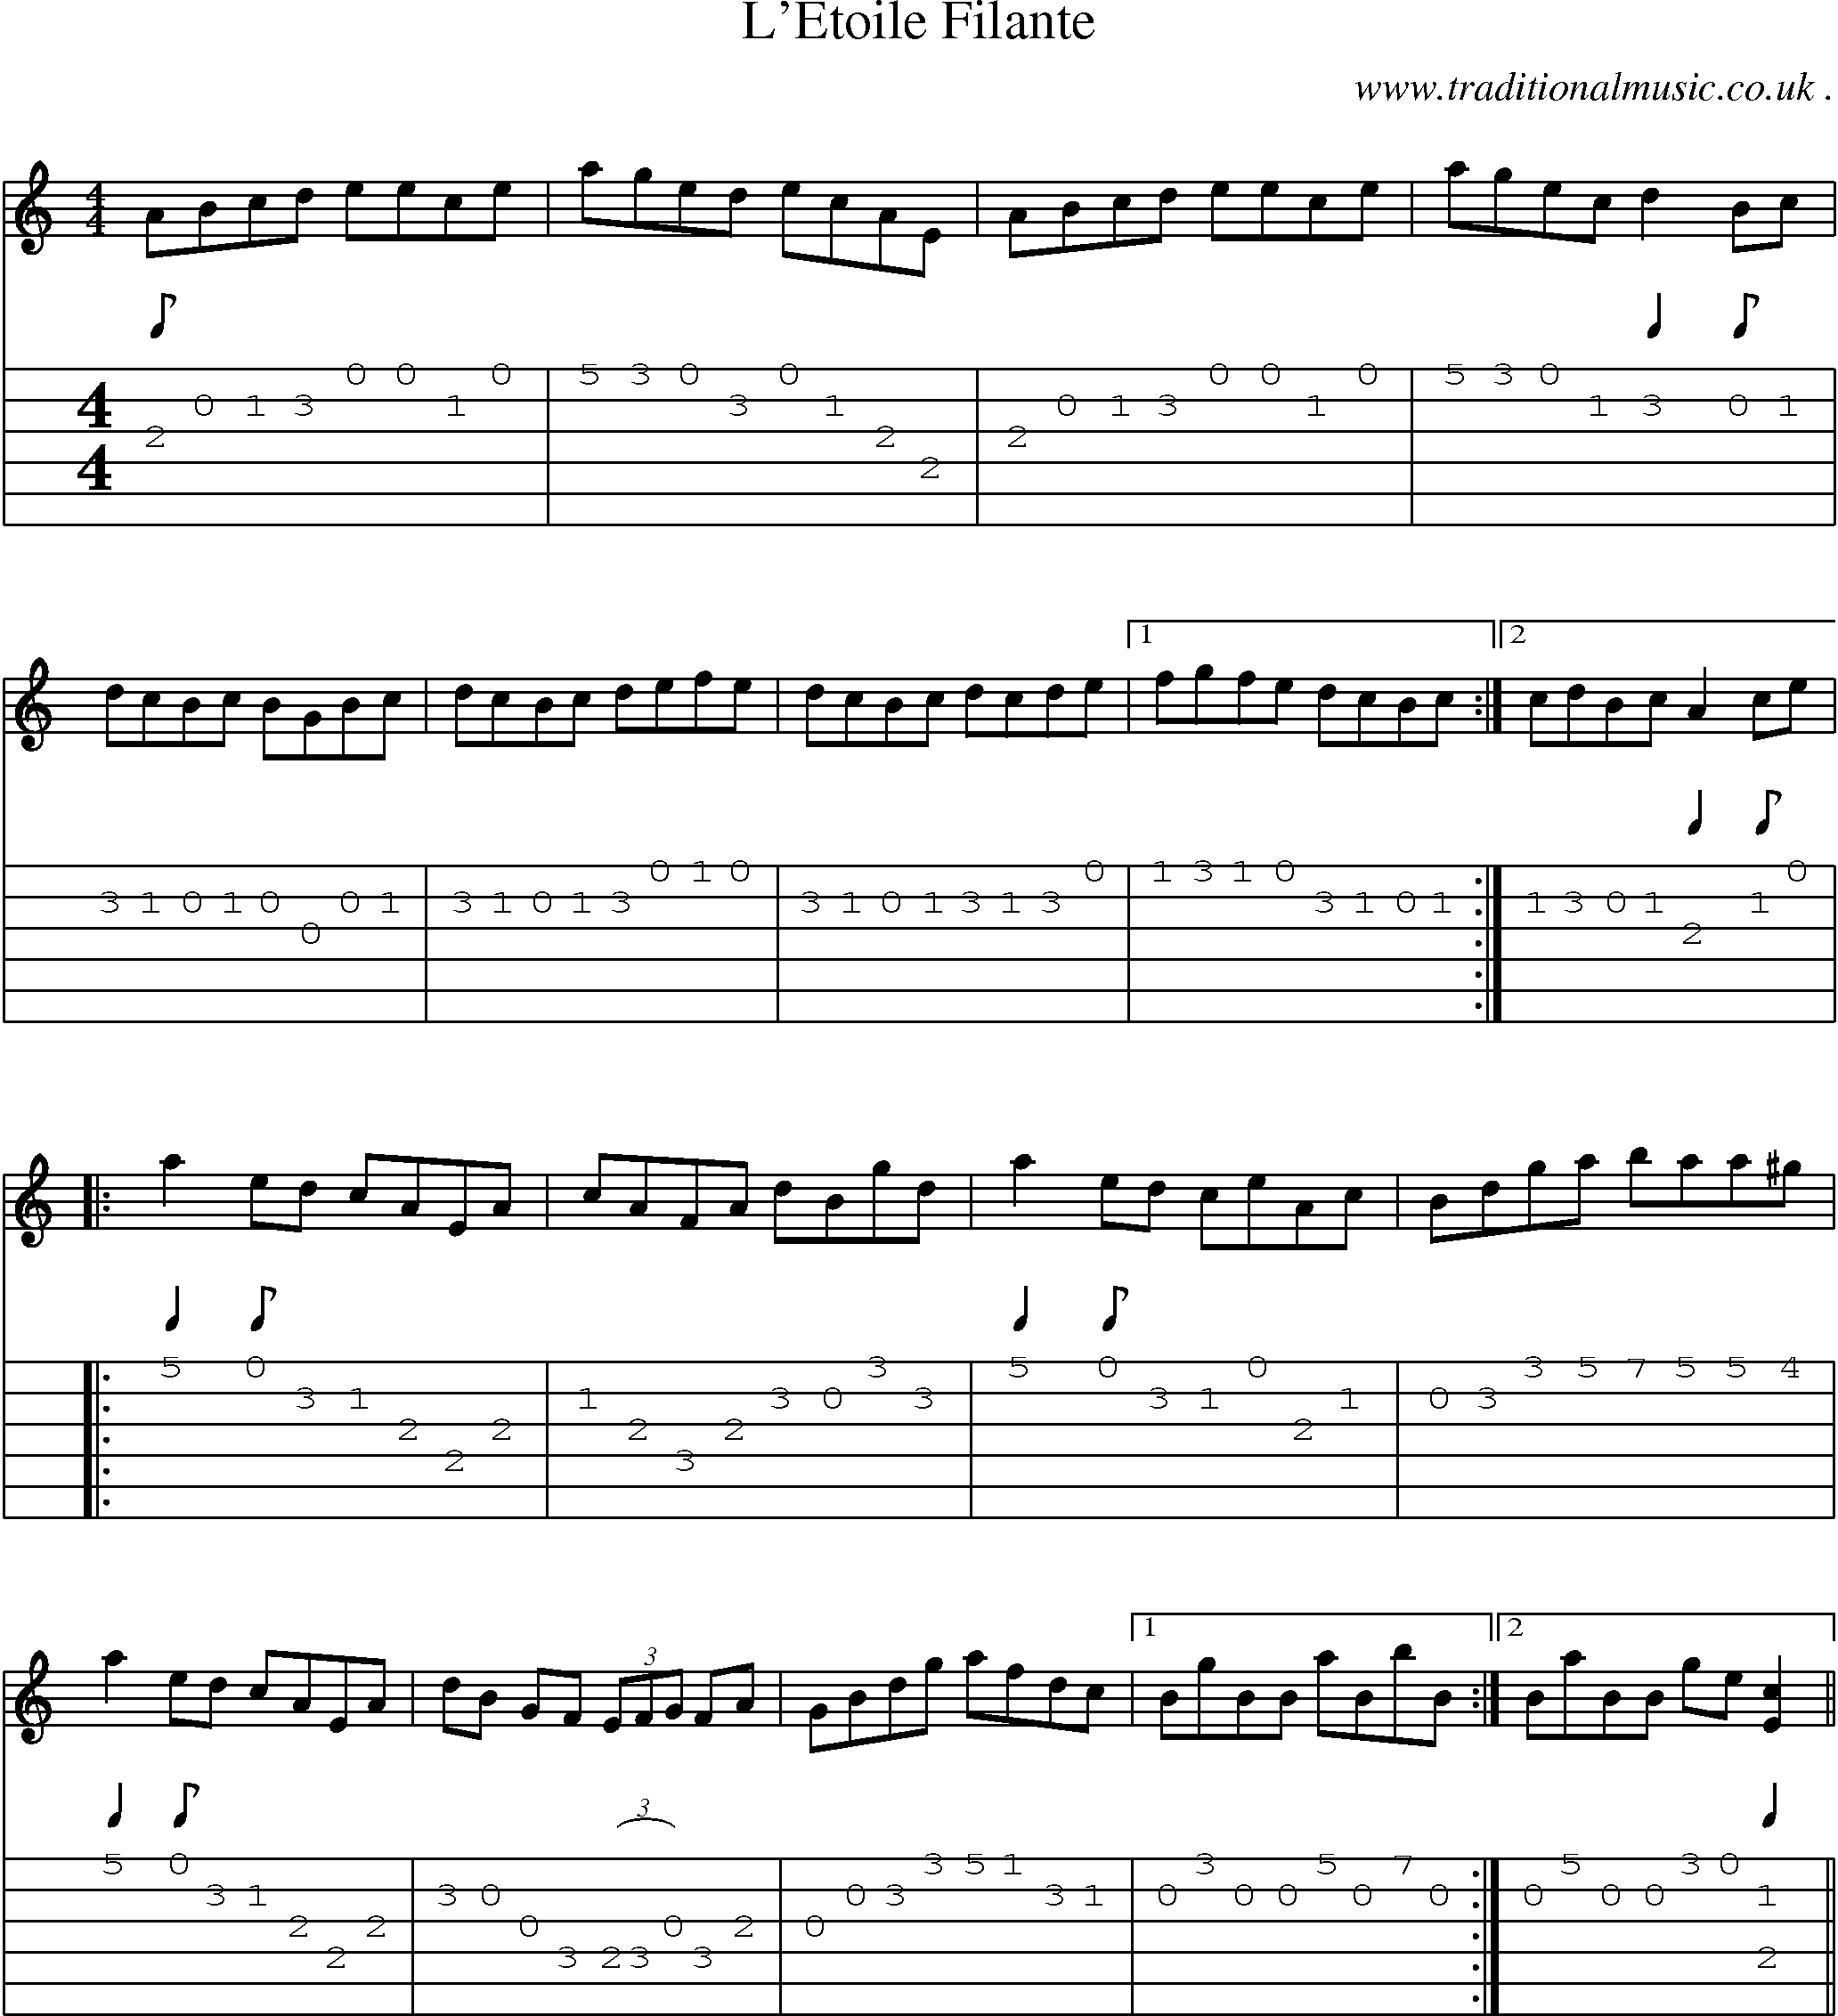 Sheet-Music and Guitar Tabs for Letoile Filante